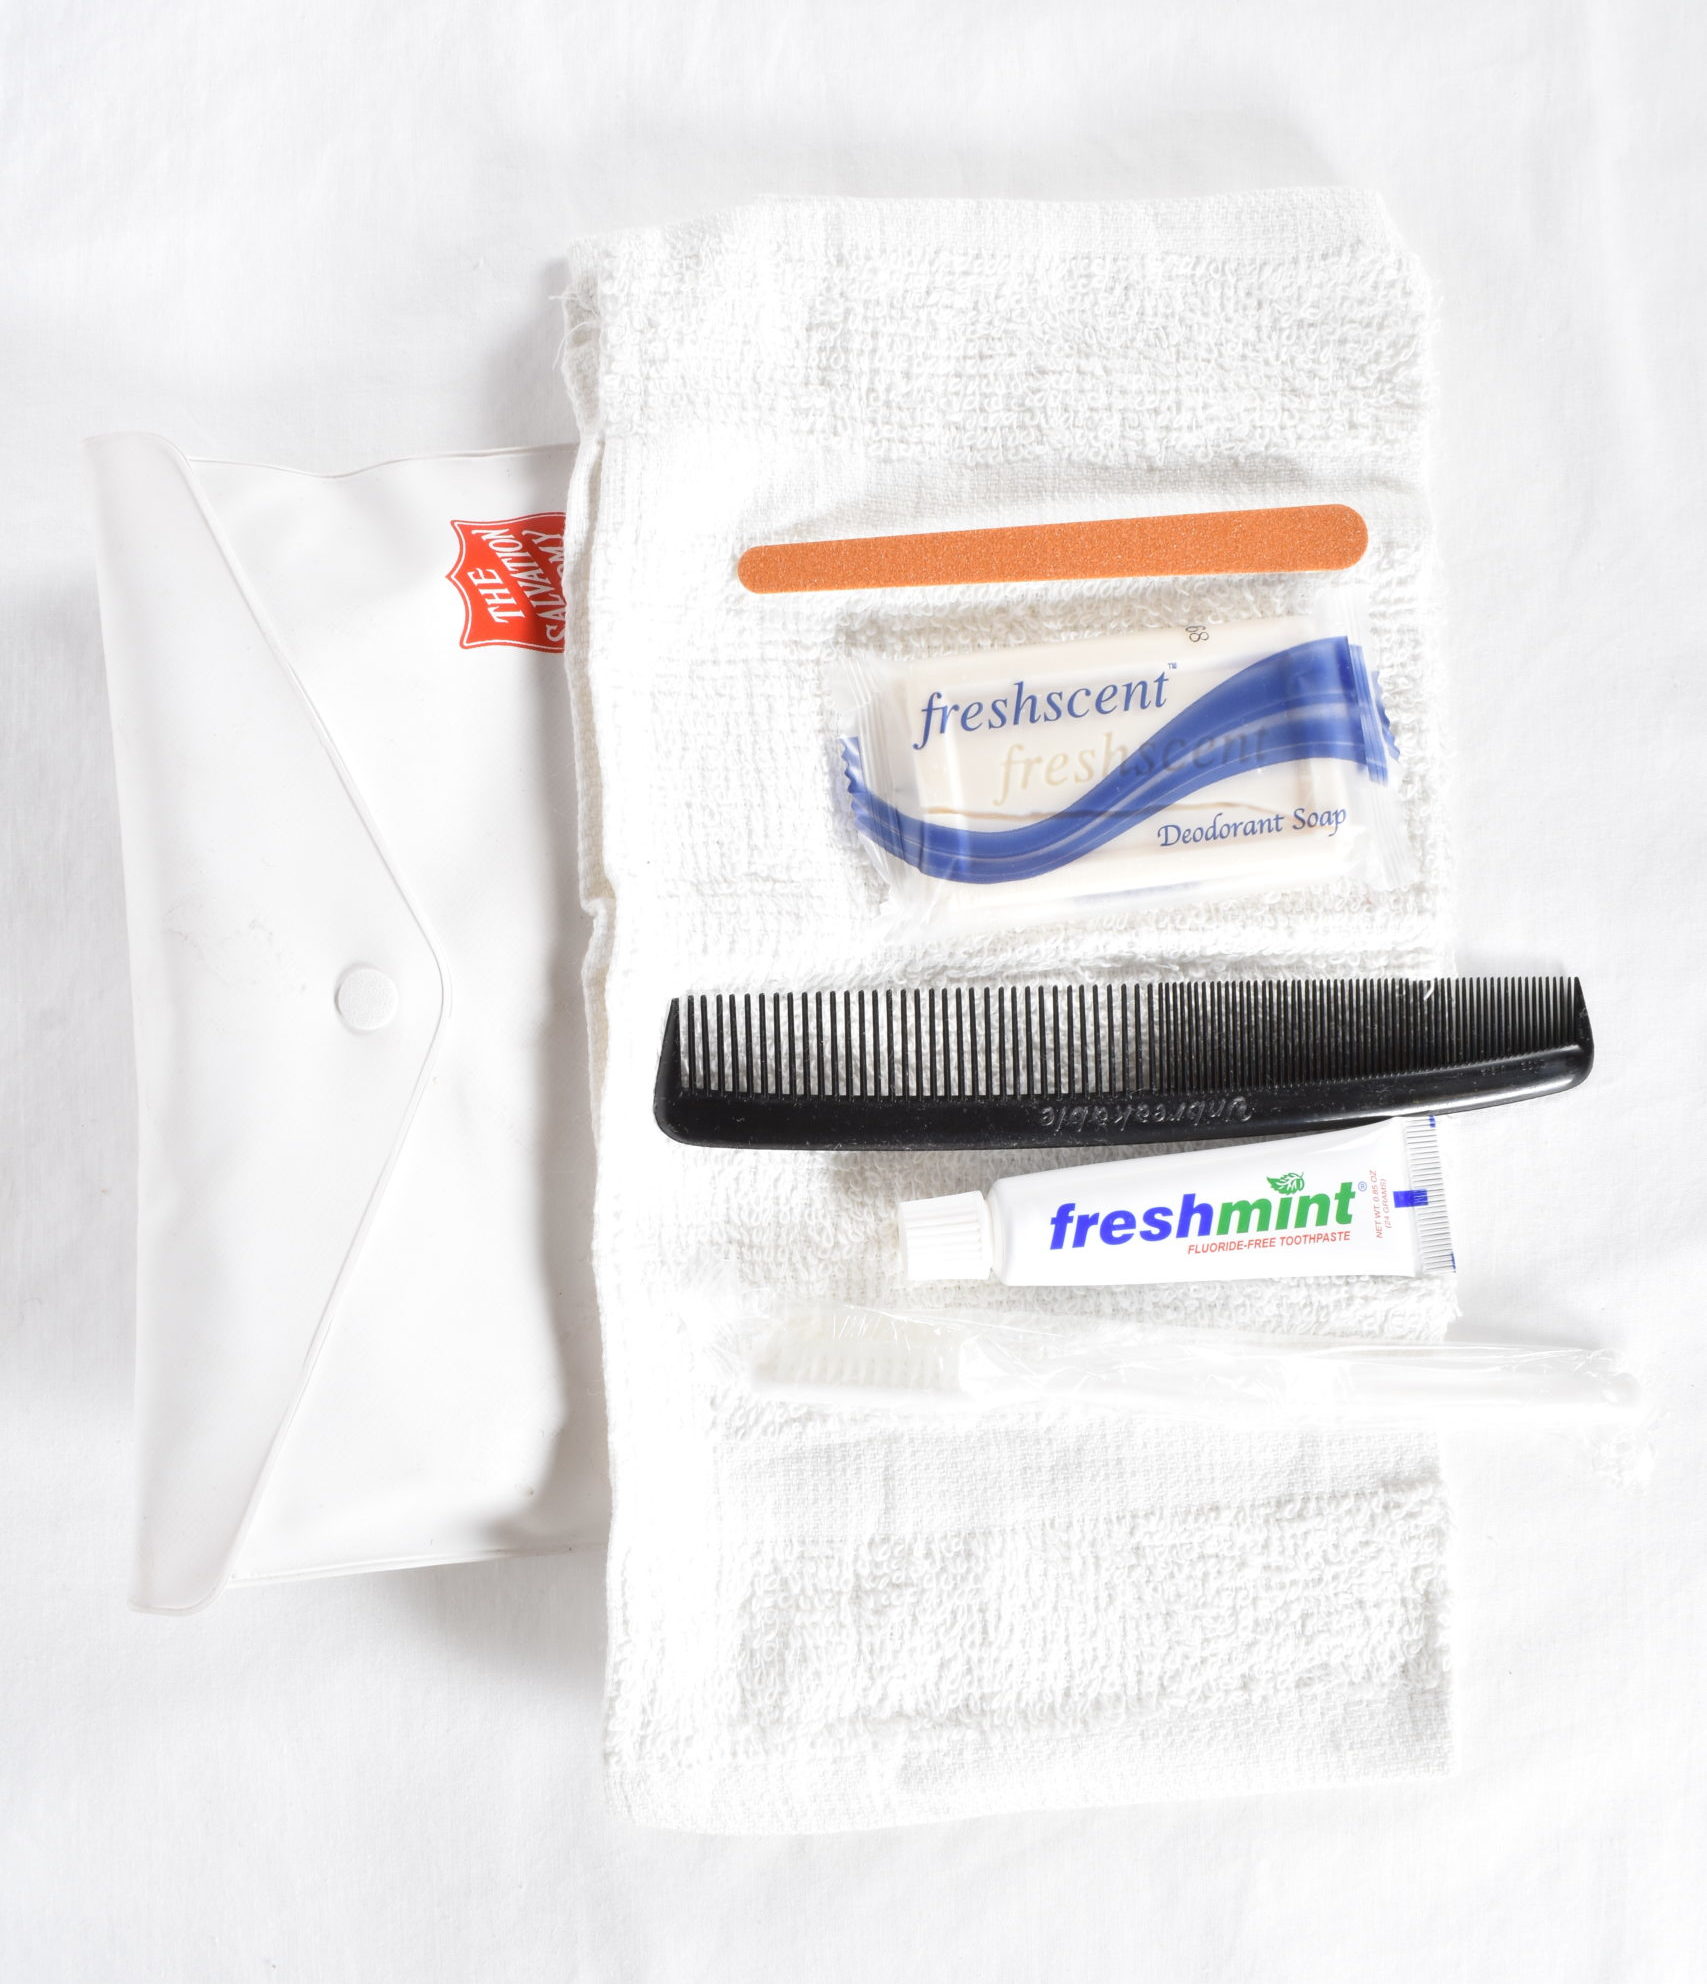 A hygiene kit with white wash cloth, white toothbrush, toothpaste, black comb, bar of soap, and nail file. The items are housed in a white vinyl envelope which closes with a snap.